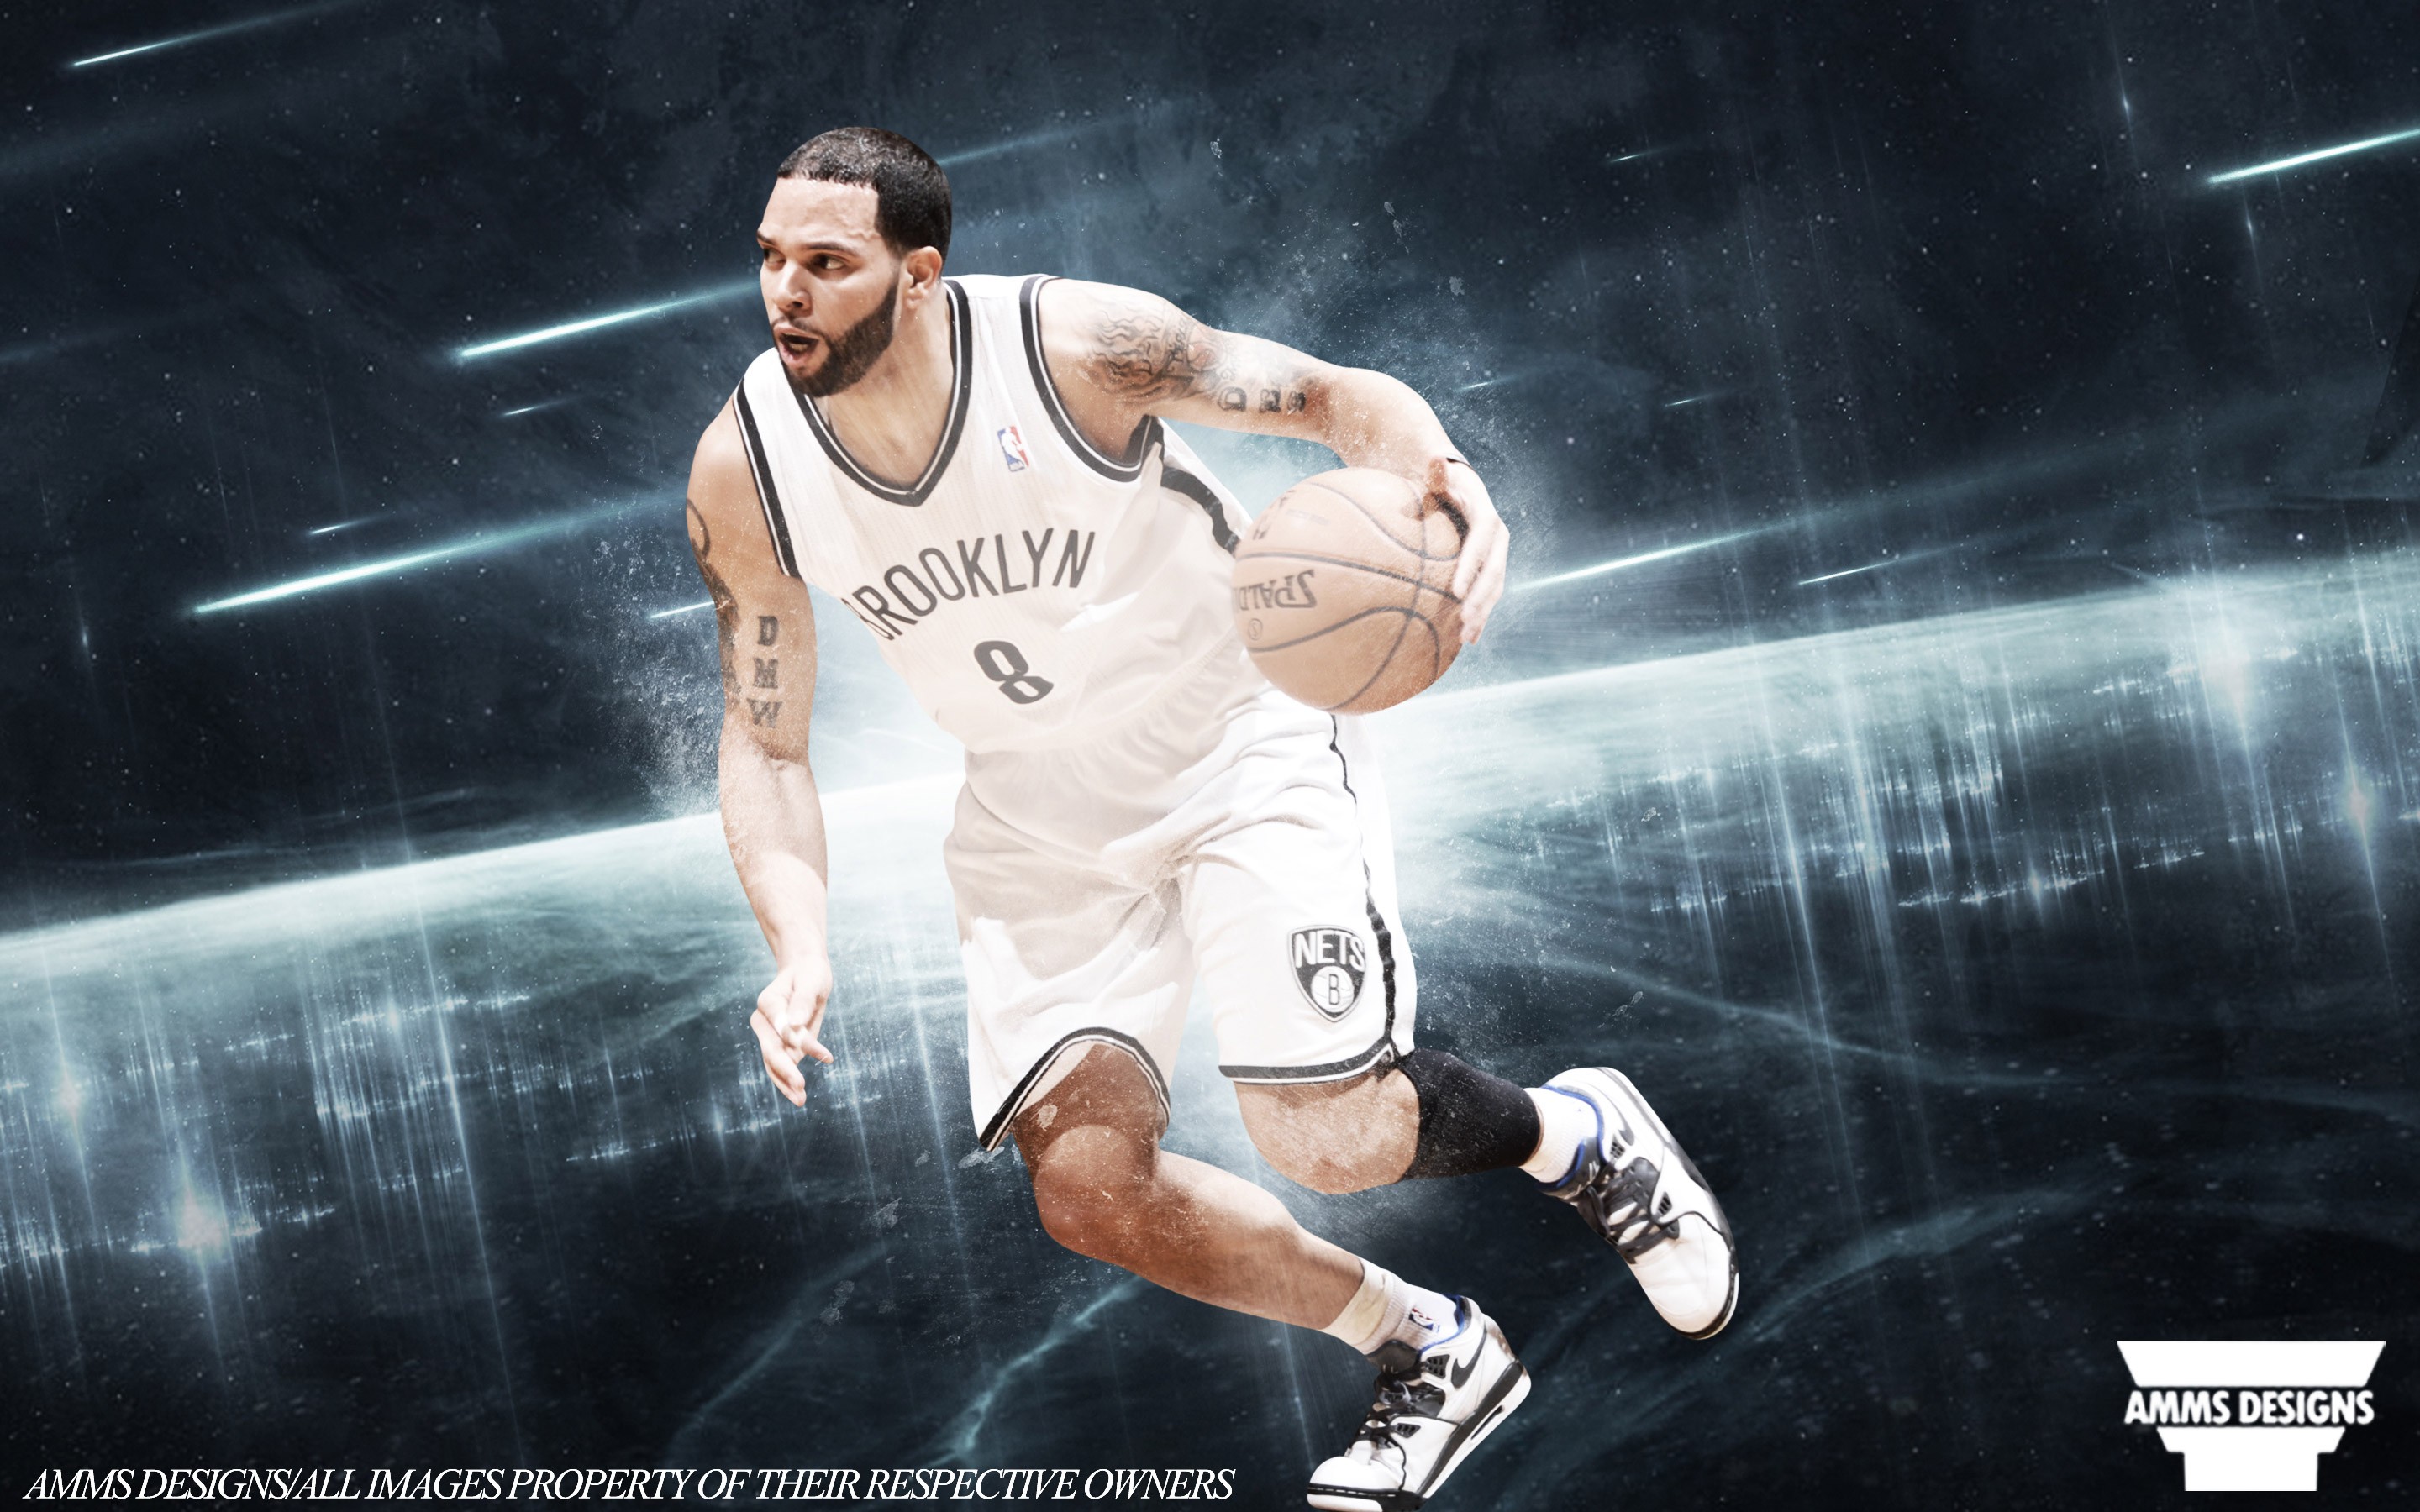 Deron Williams Iphone Wallpaper Awesome Jason Williams - Jazz Deron Williams Wallpaper Hd , HD Wallpaper & Backgrounds